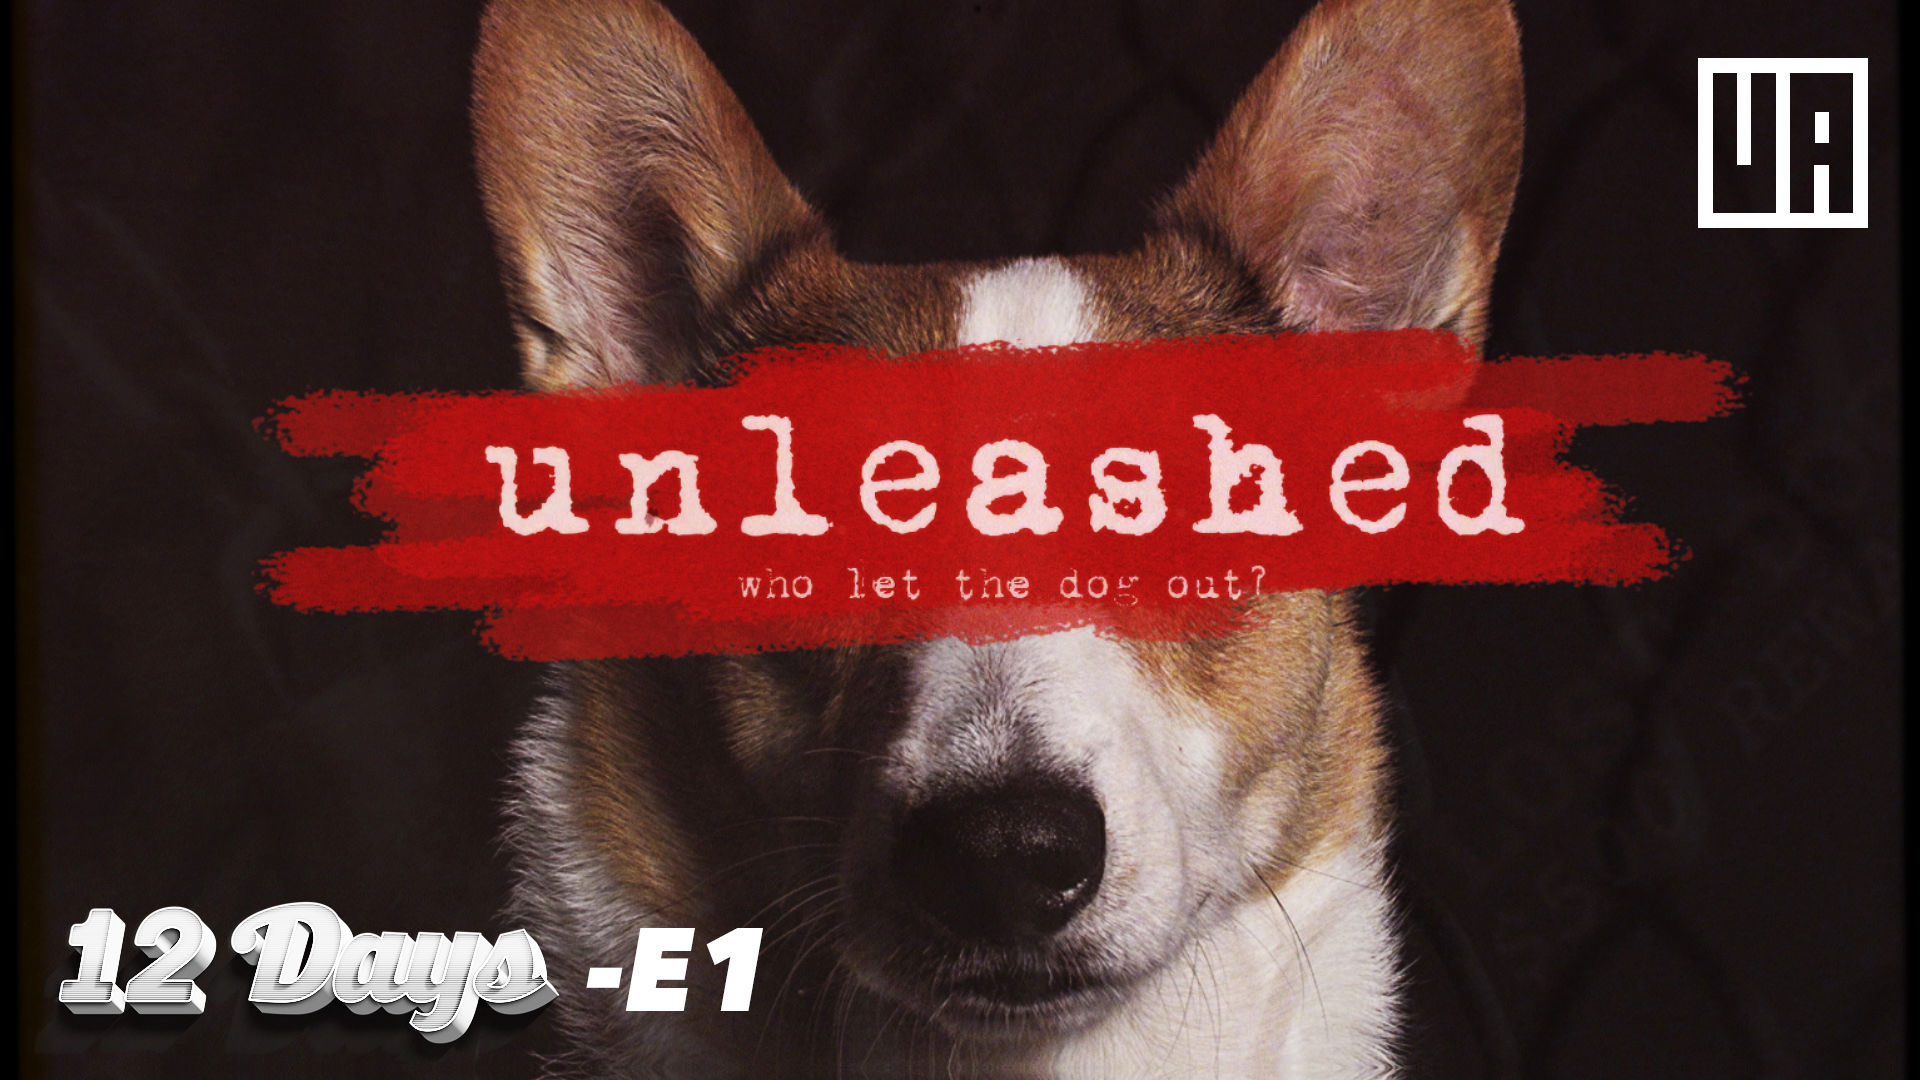 E1 - Unleashed - "Who Let the Dog Out?"